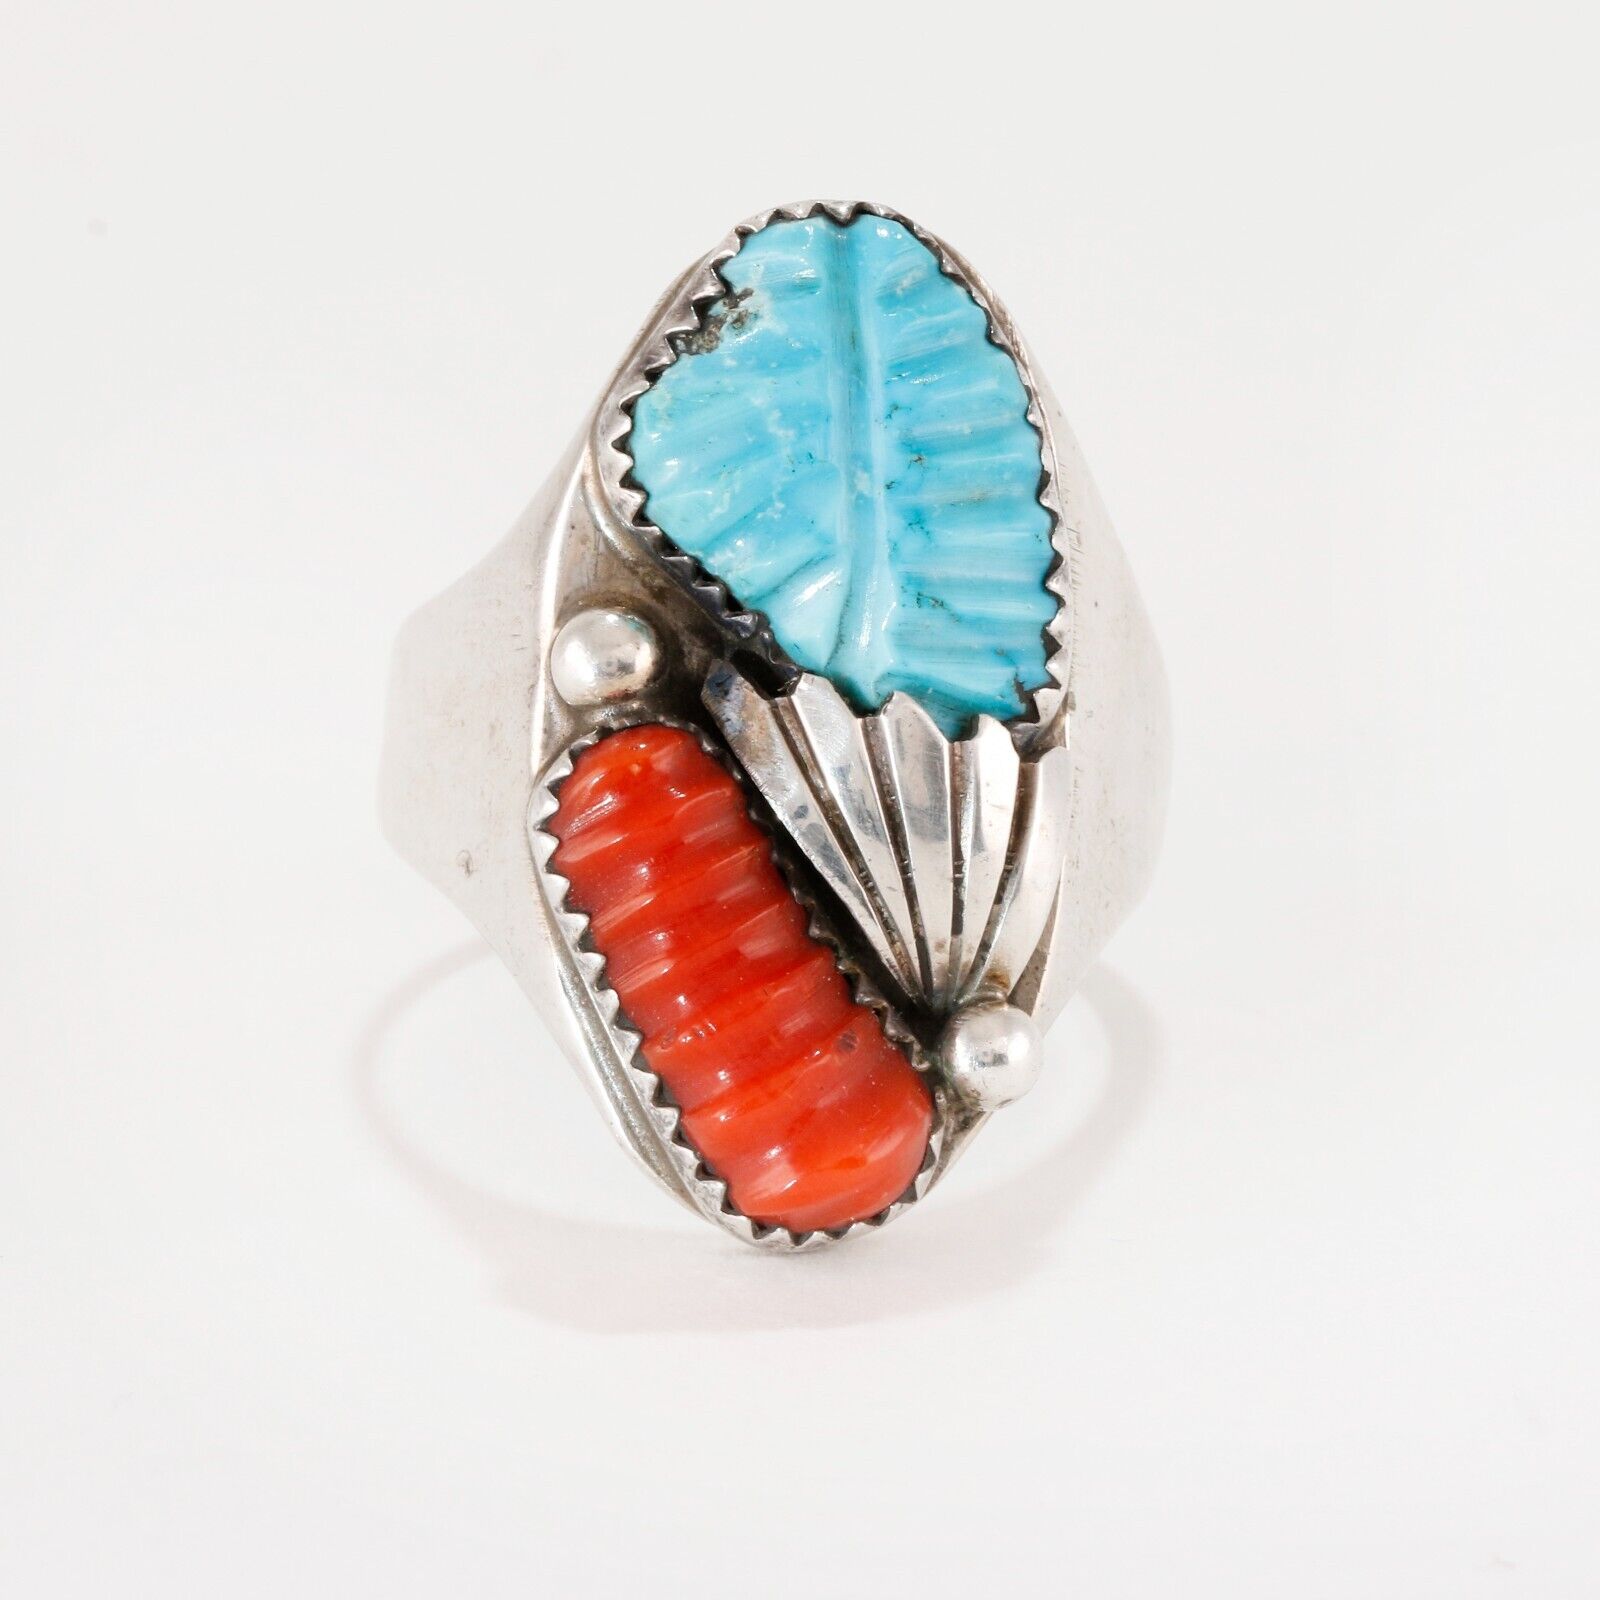 NATIVE AMERICAN ZUNI STERLING CARVED TURQUOISE CORAL 2 STONE LEAF RING 12